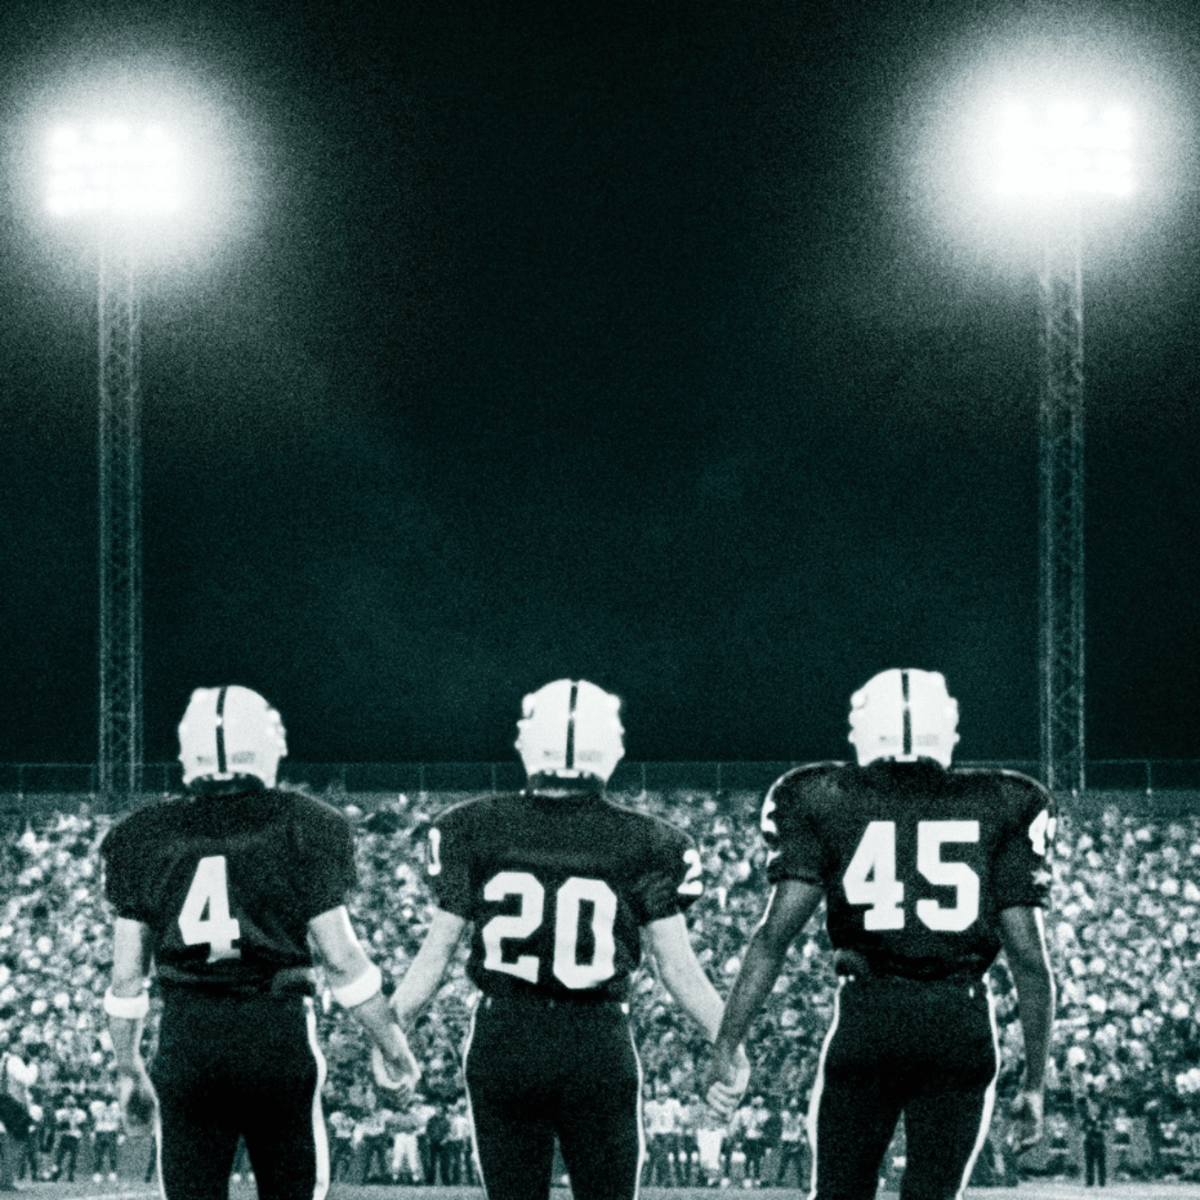 Friday Night Lights' book banned. Then not. Two heroes fought for it.